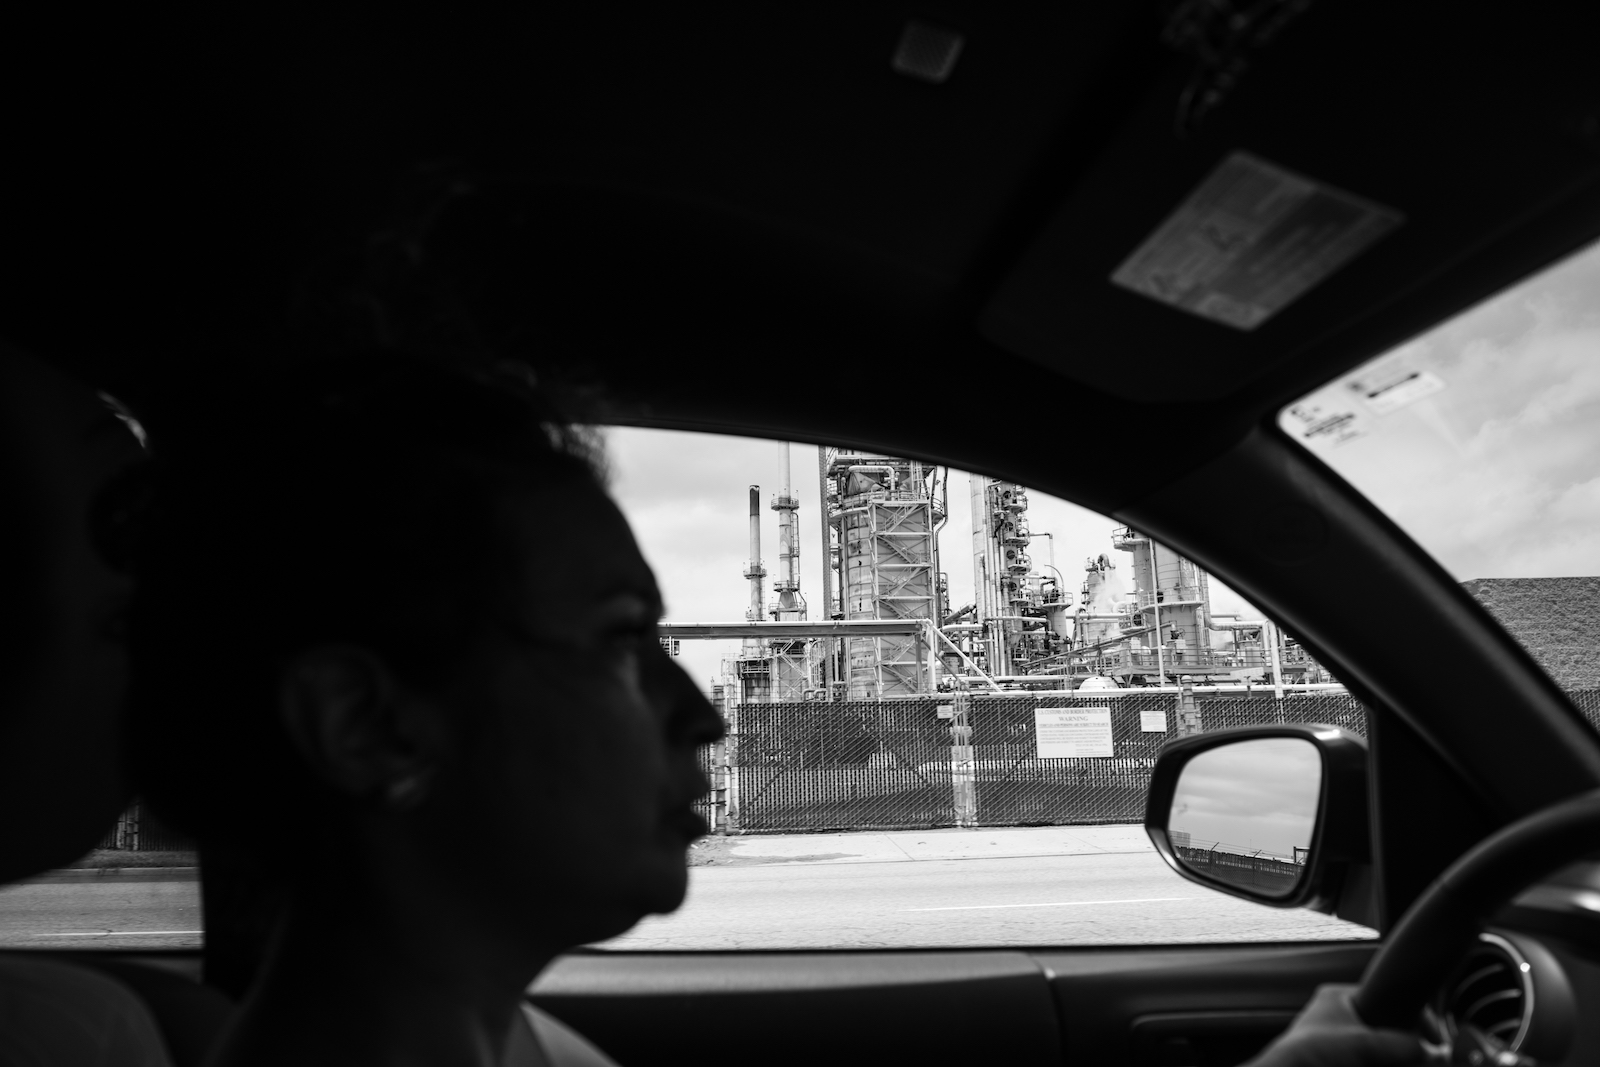 One family, three generations of cancer, and the largest concentration of oil refineries in California